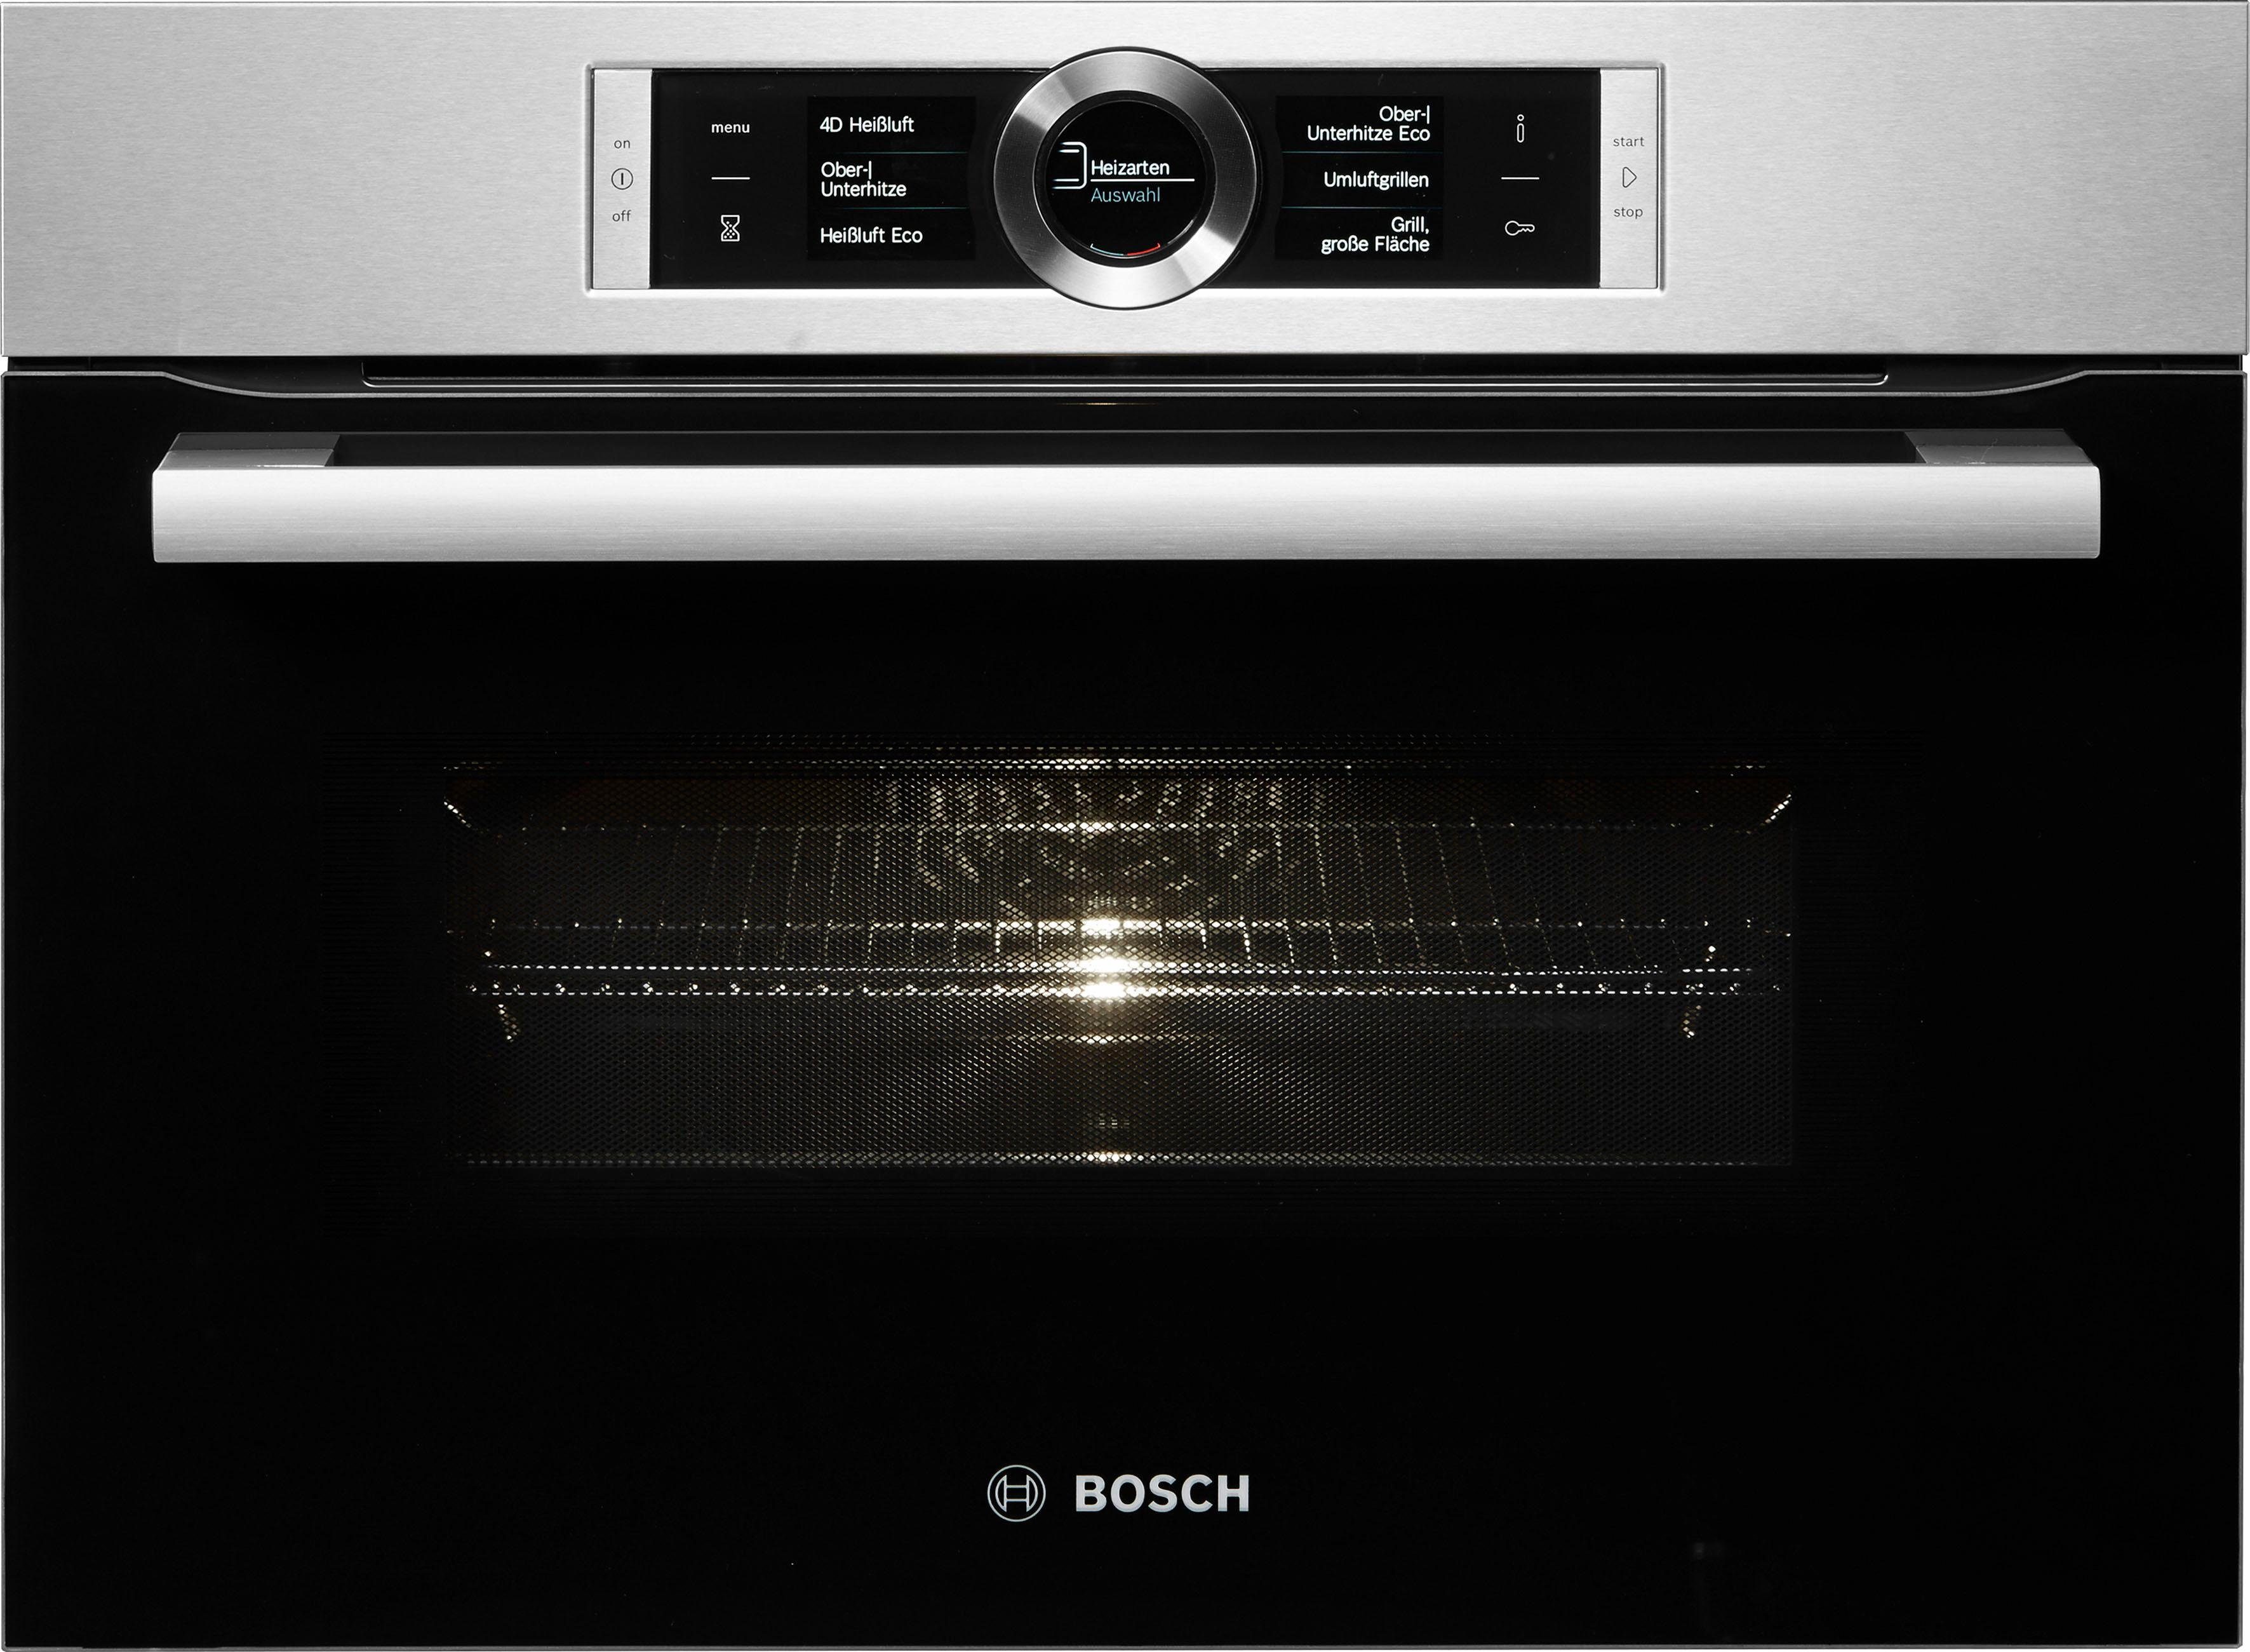 BOSCH mit Mikrowelle CMG636BS1, Direct ecoClean Backofen